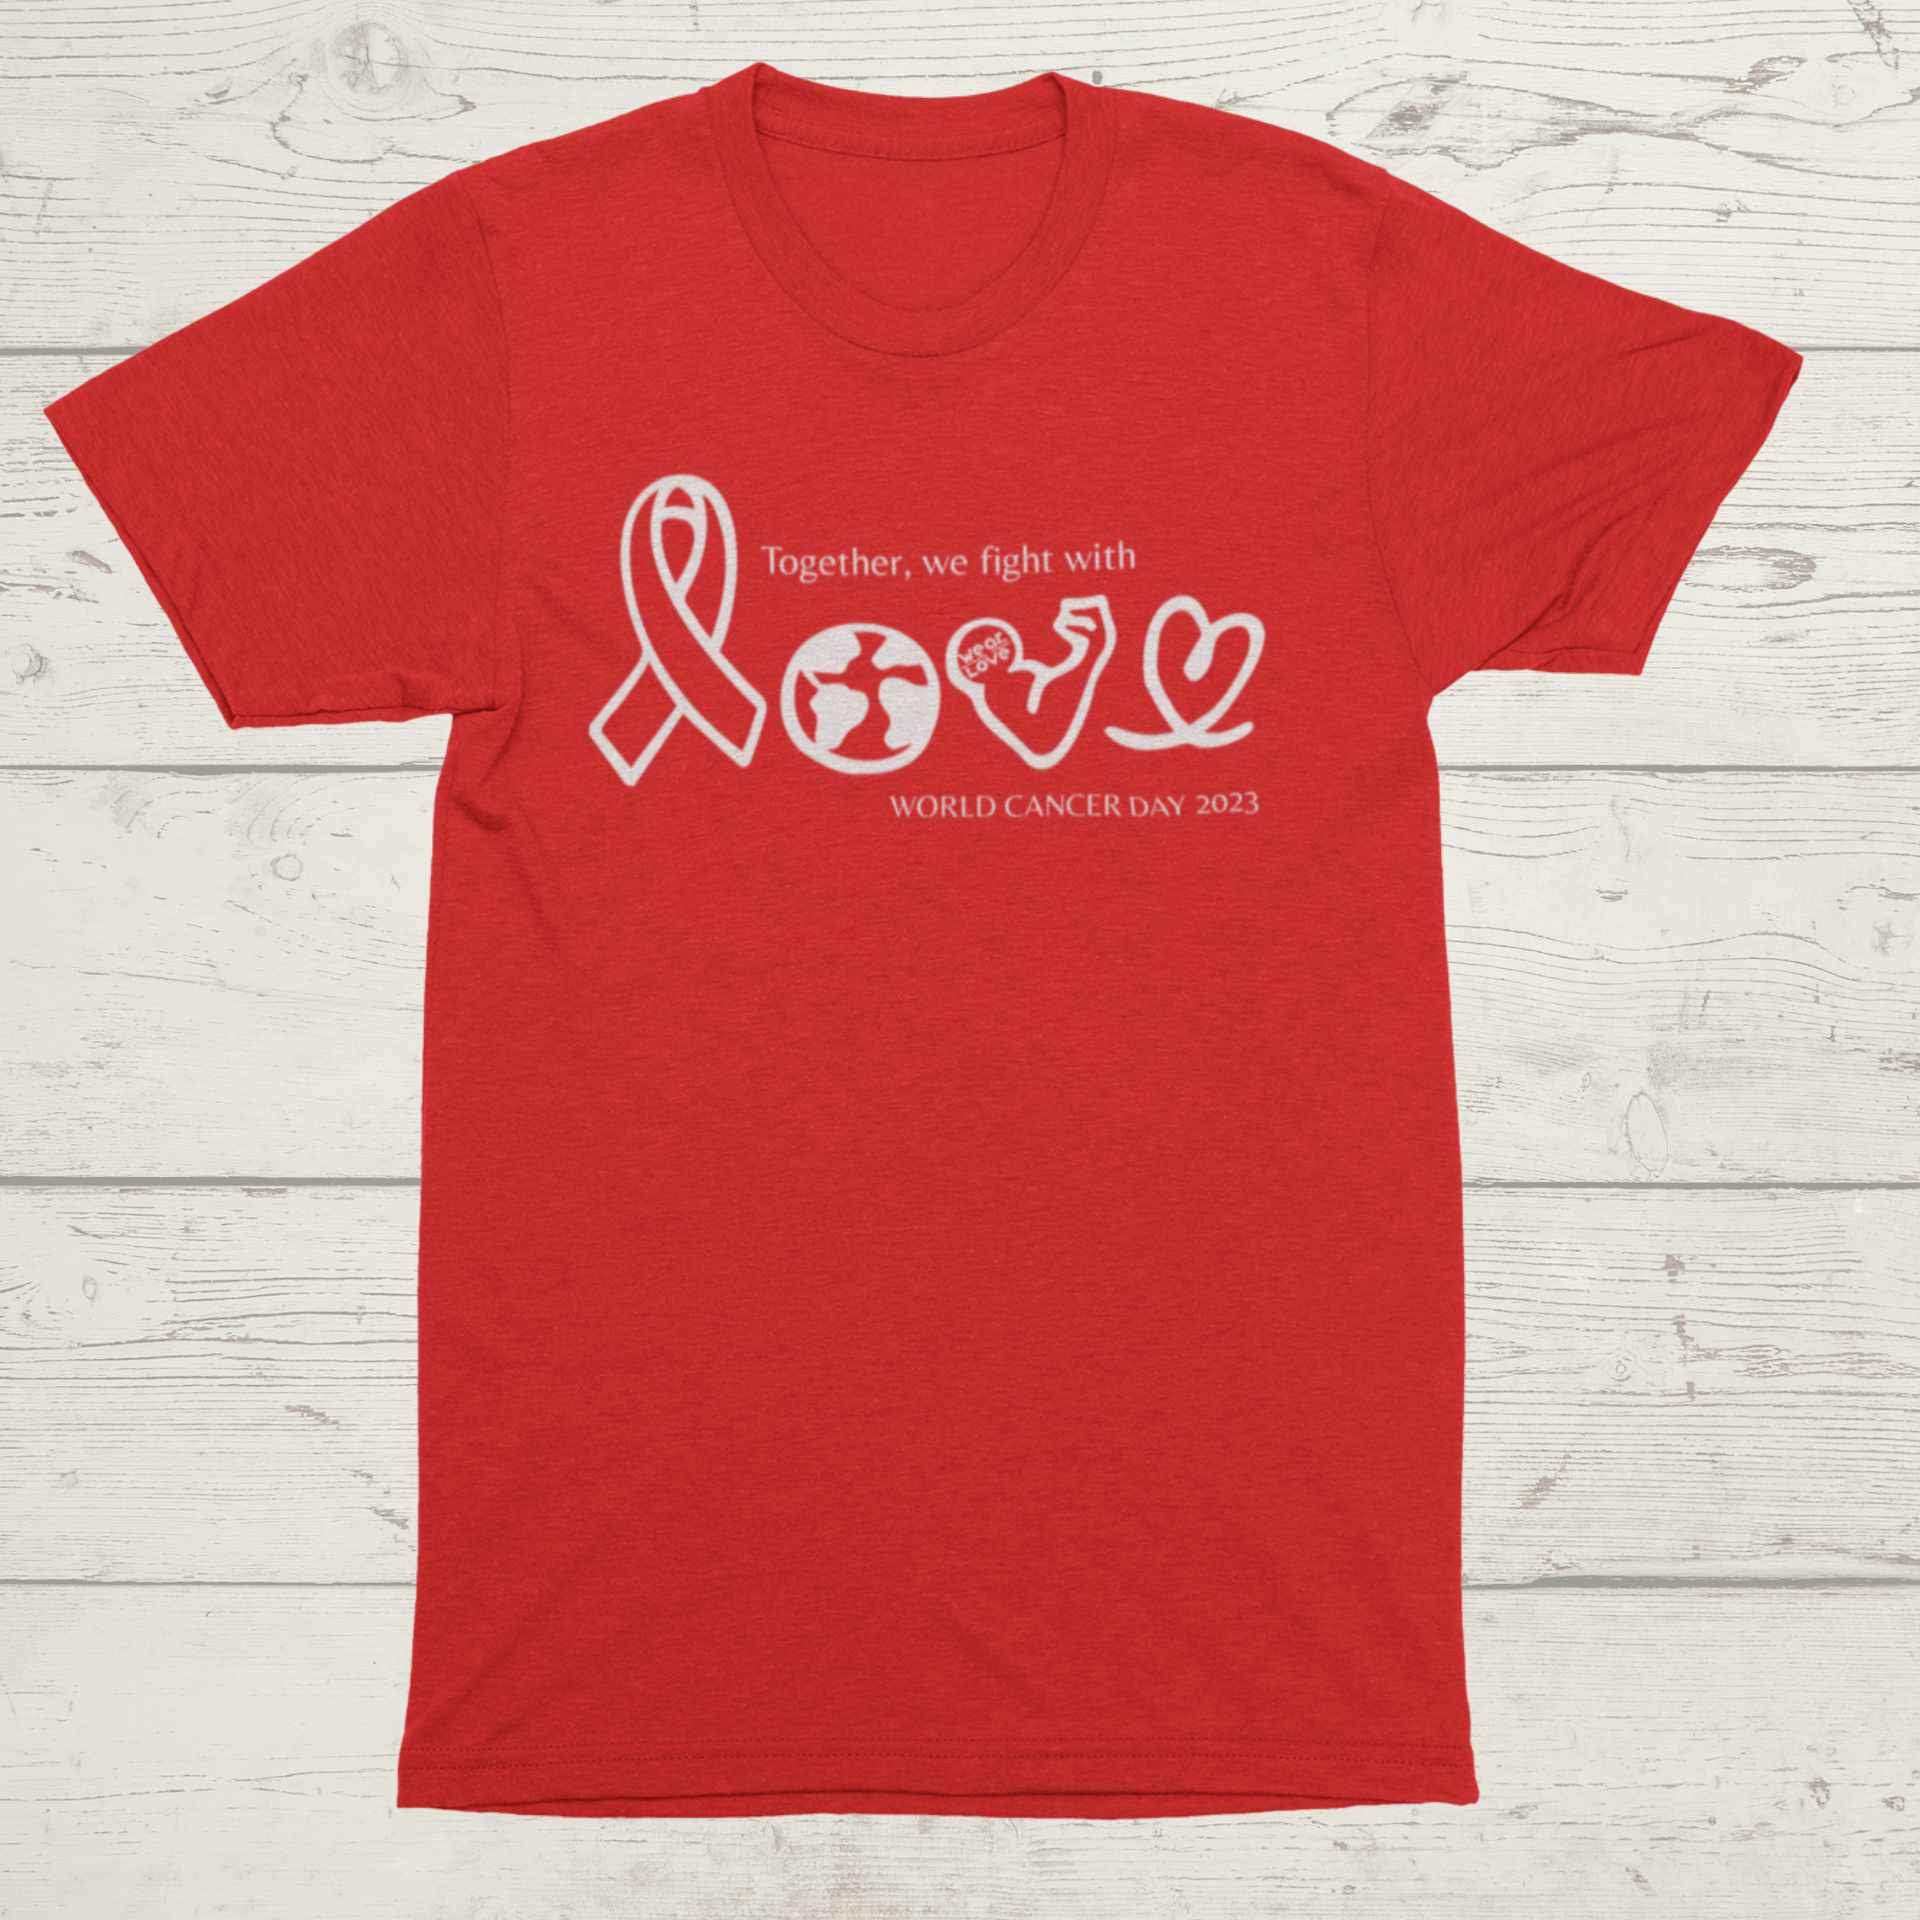 "Together we fight with LOVE" T-Shirt (World Cancer Day) Fundraiser